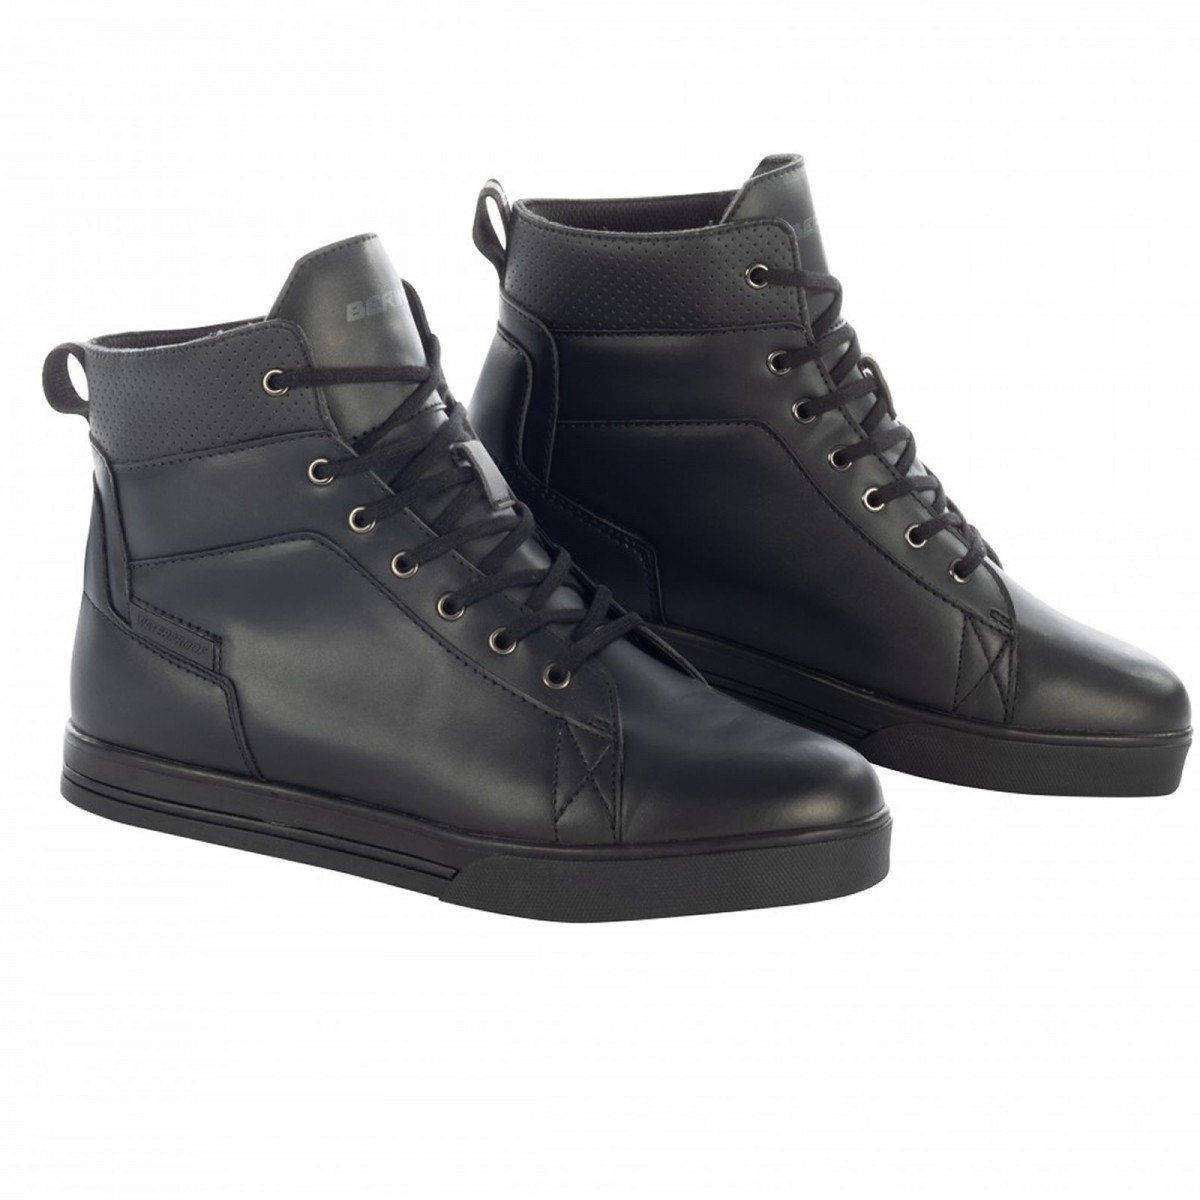 Image of Bering Indy Noir Chaussures Taille 43